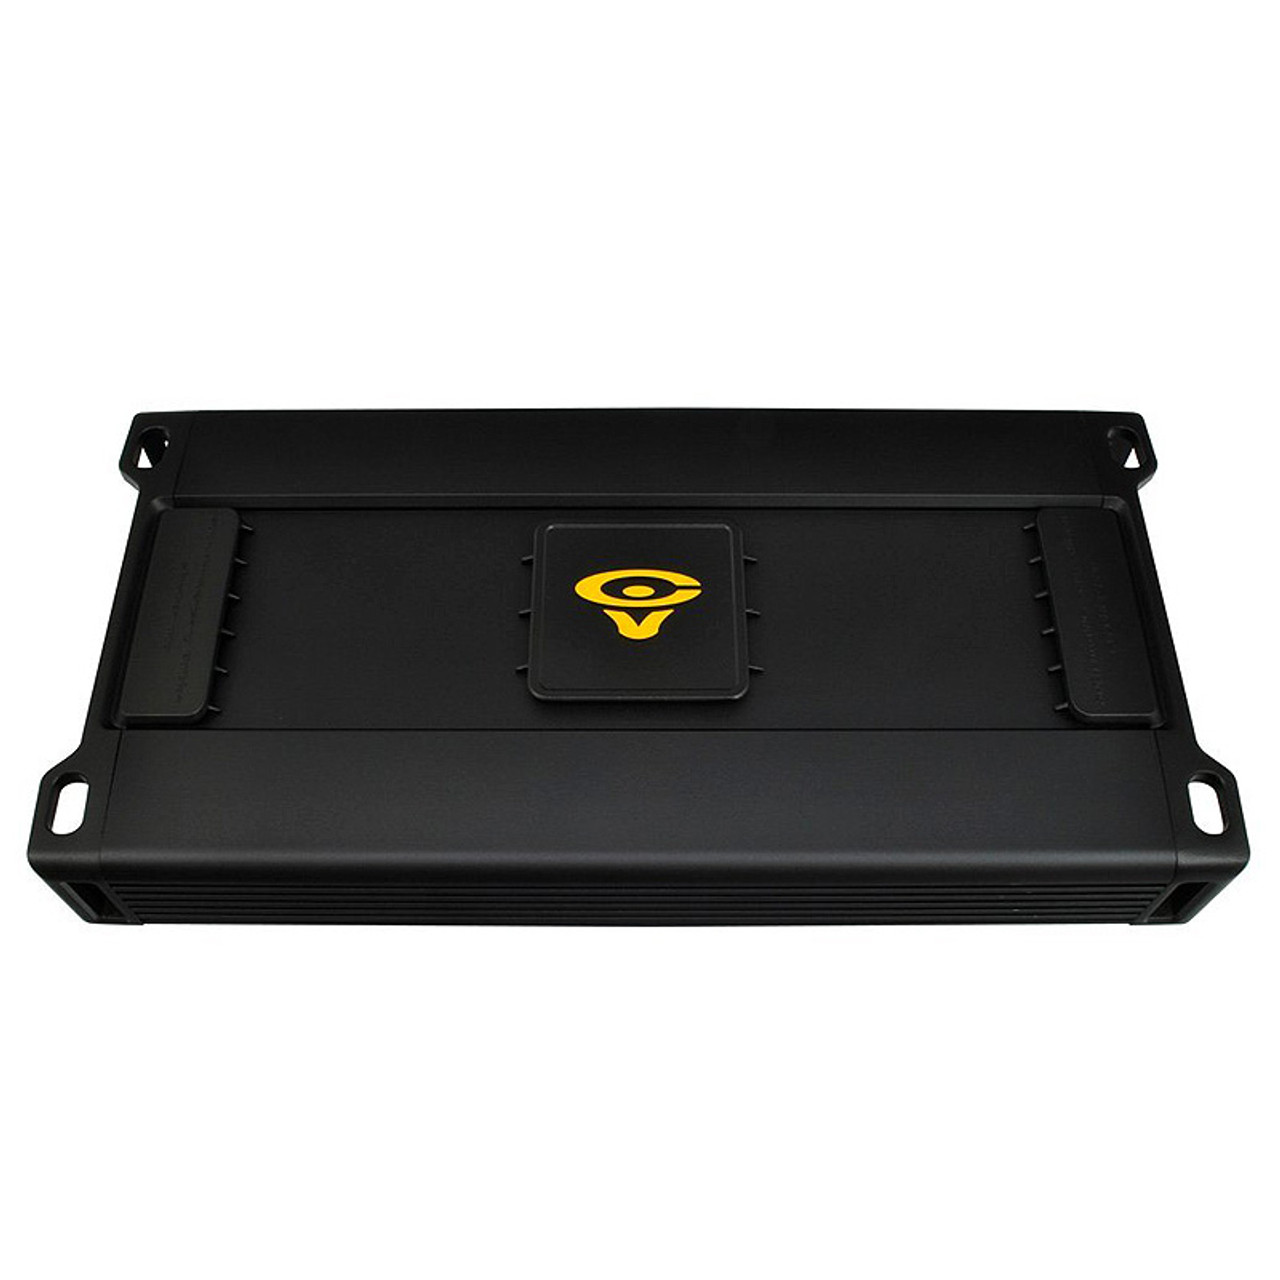 Cerwin-Vega SPRO2100.1D 2100W RMS Stroker Pro Series Class-D Monoblock 1-Ohm Stable Amplifier with Bass Knob